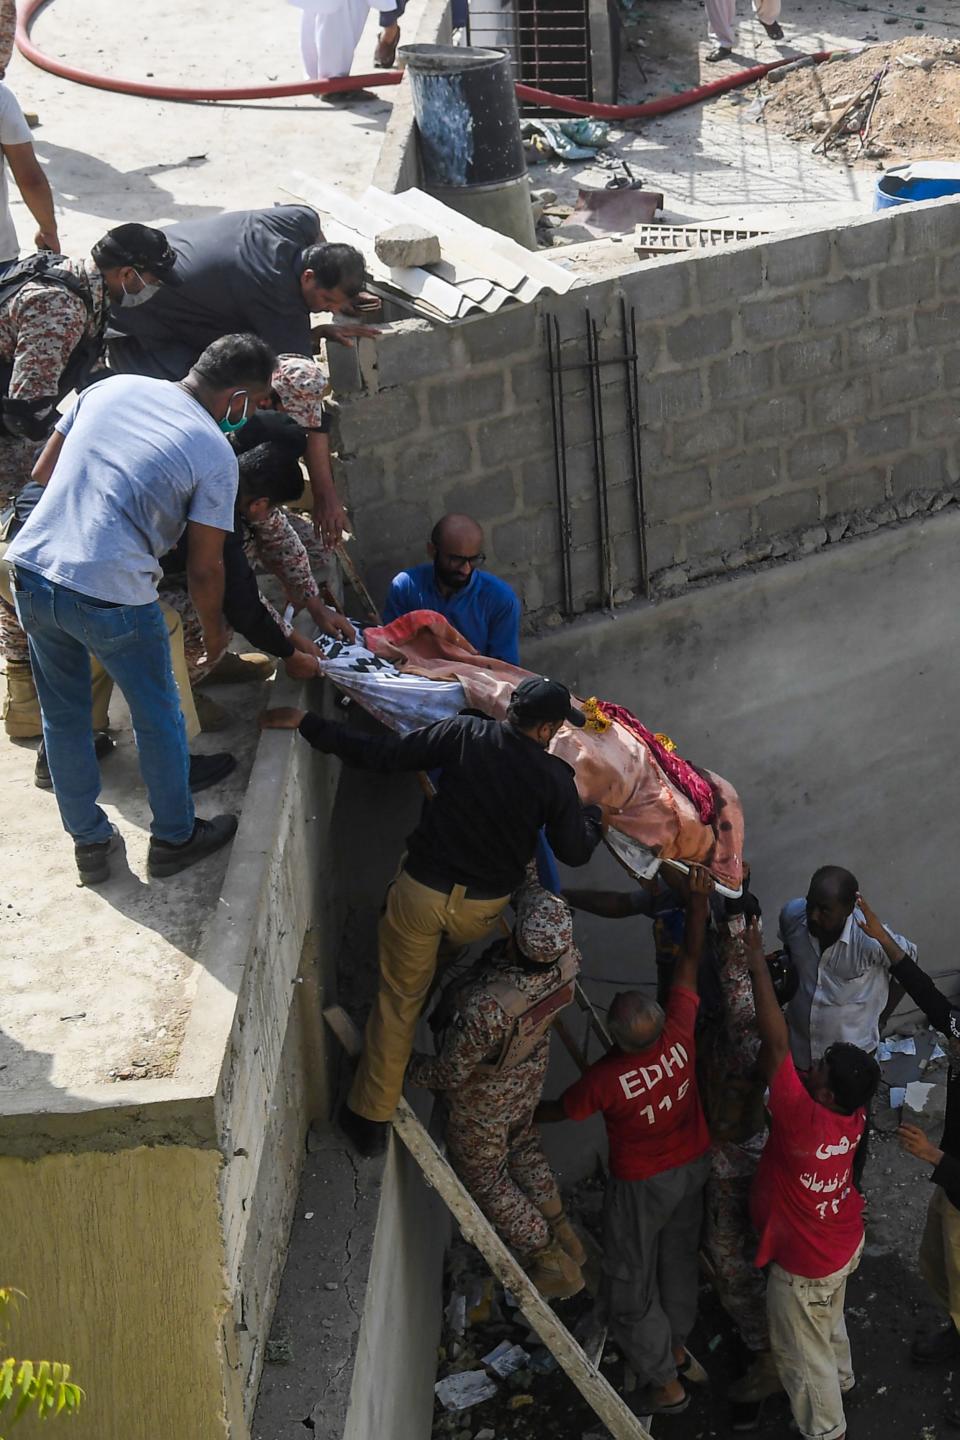 EDITORS NOTE: Graphic content / Rescue workers evacuate a body from the site after a Pakistan International Airlines aircraft crashed in a residential neighbourhood in Karachi on May 22, 2020. - A Pakistan passenger plane with more than 100 people believed to be on board crashed in the southern city of Karachi on May 22, the country's aviation authority said. (Photo by Asif HASSAN / AFP) (Photo by ASIF HASSAN/AFP via Getty Images)